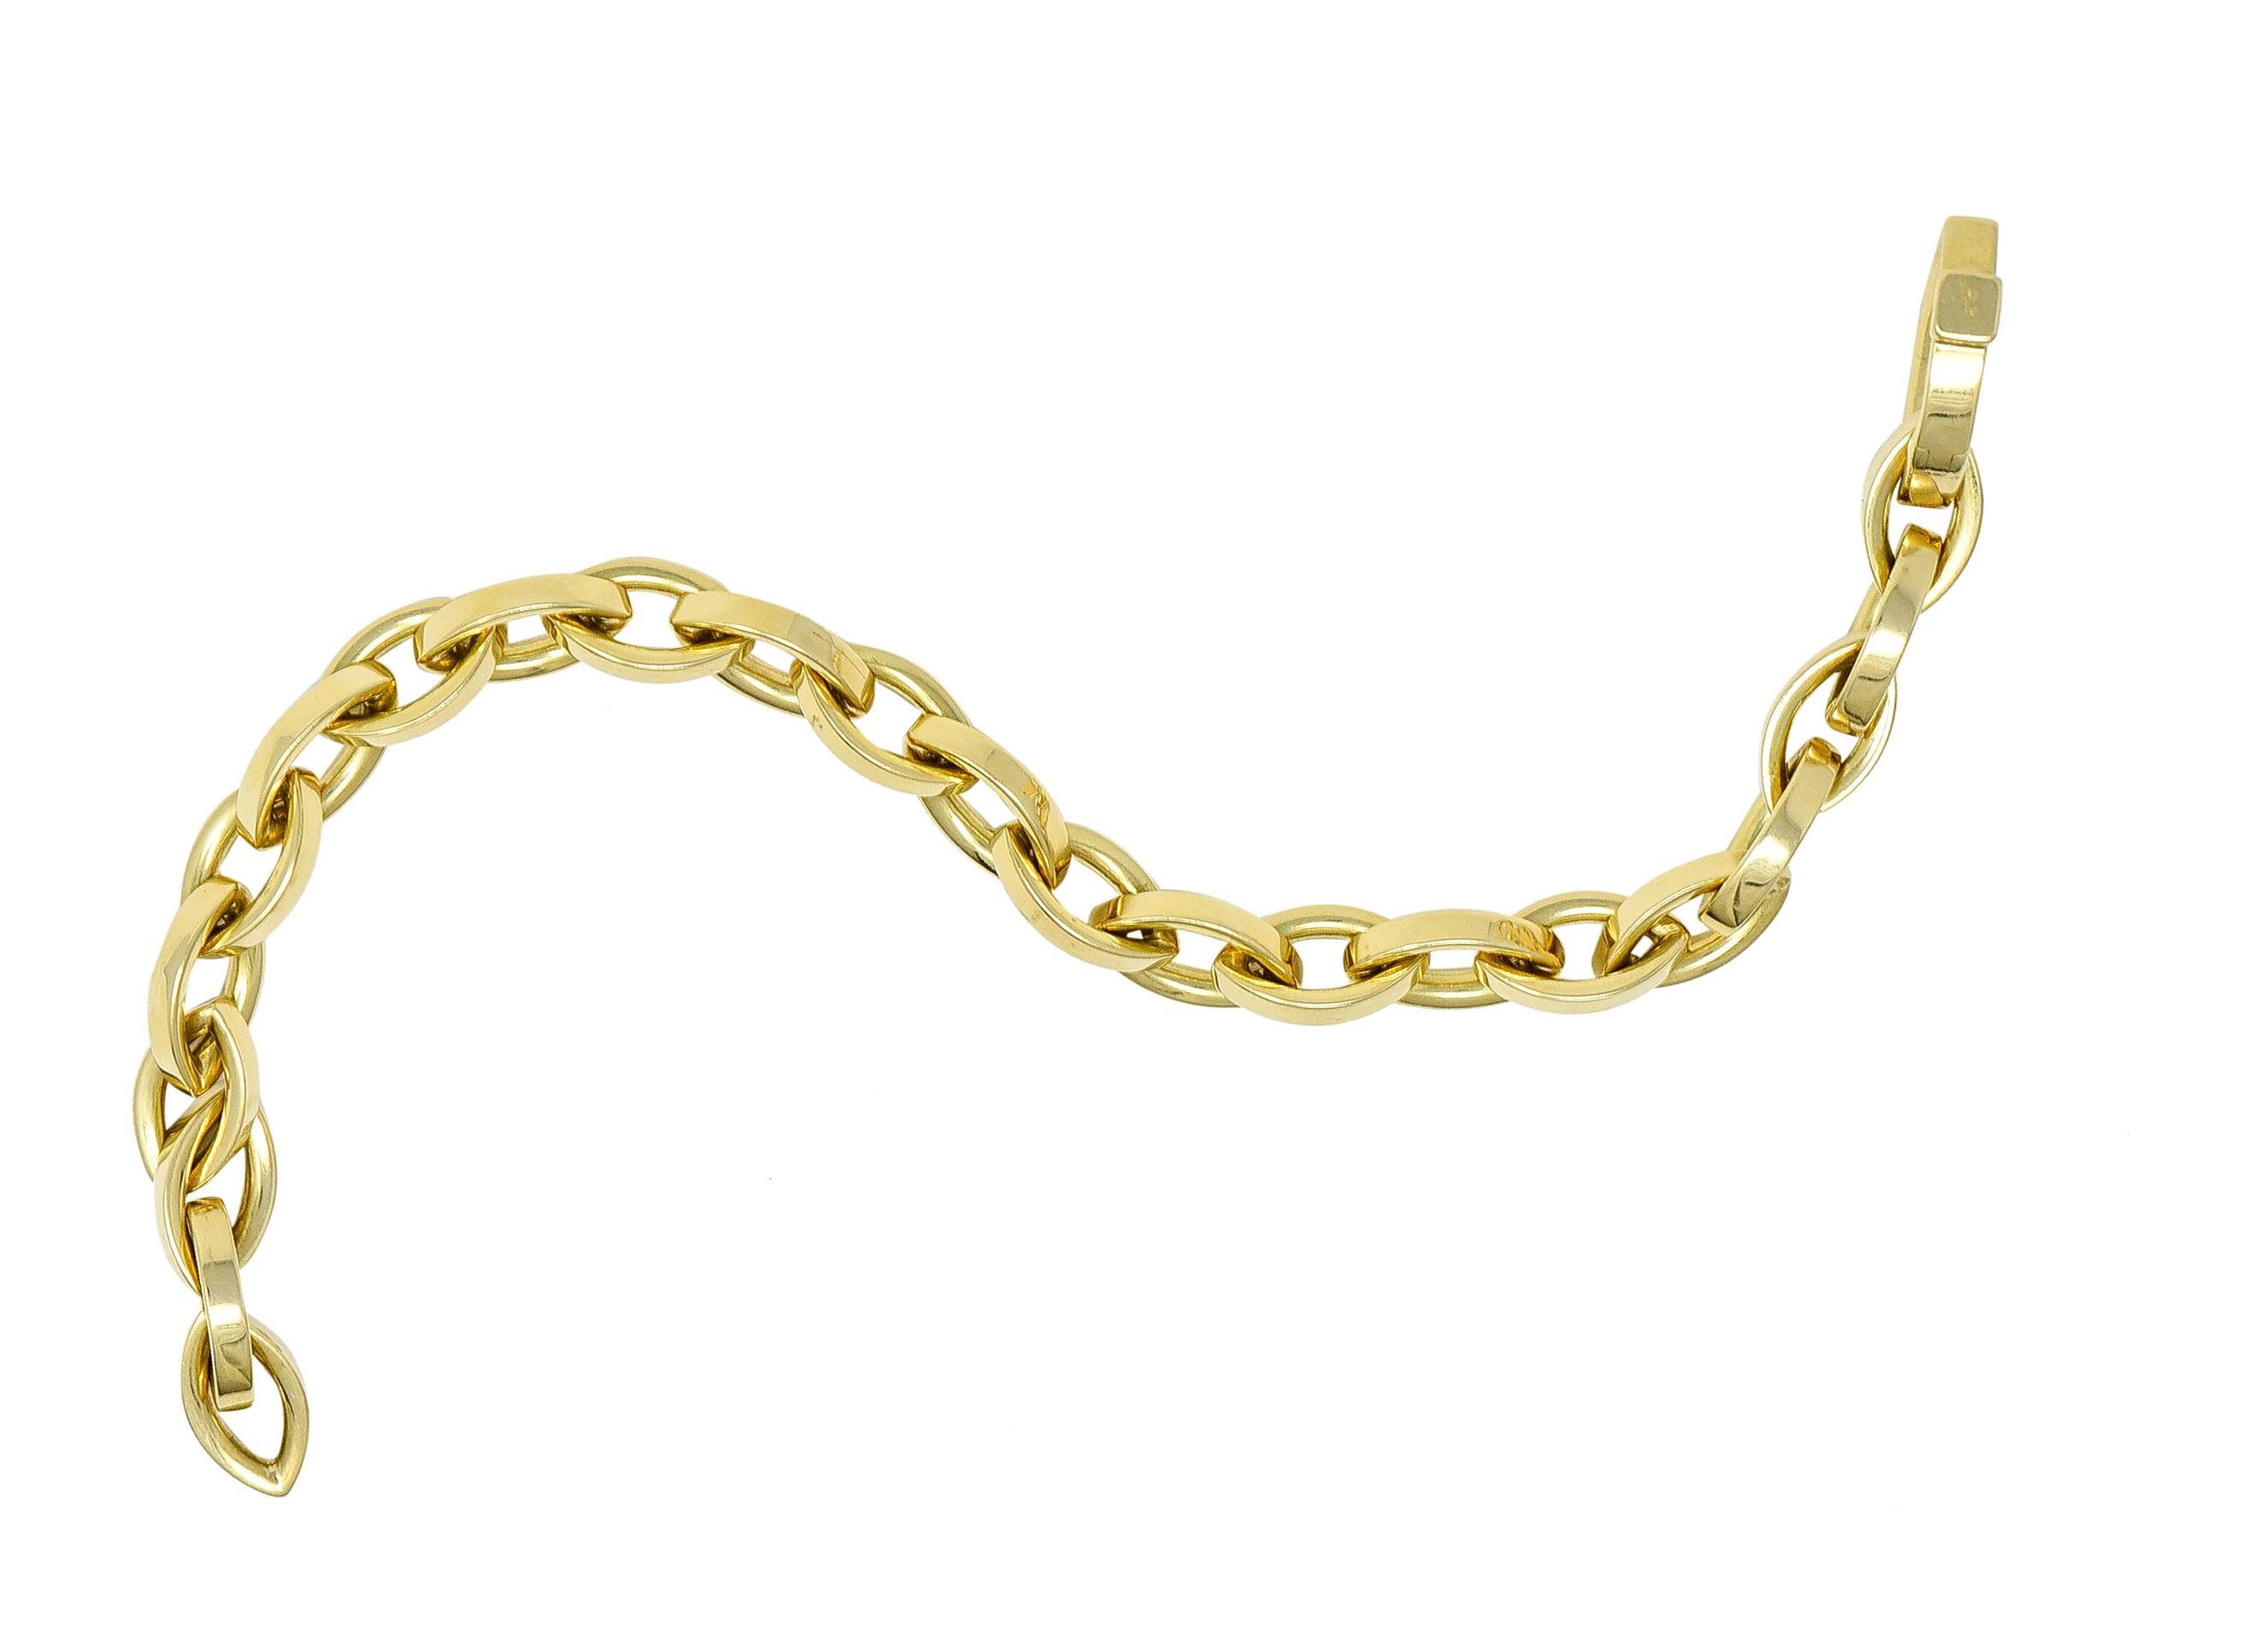 Comprised of open marquise shaped links. Featuring a high polish finish. Completed by concealed clasp closure. Stamped 750 for 18 karat gold. Fully signed Tiffany & Co., Italy. Circa: 1990's. Bracelet size: 7 1/2 inch circumference with 3 1/4 inch